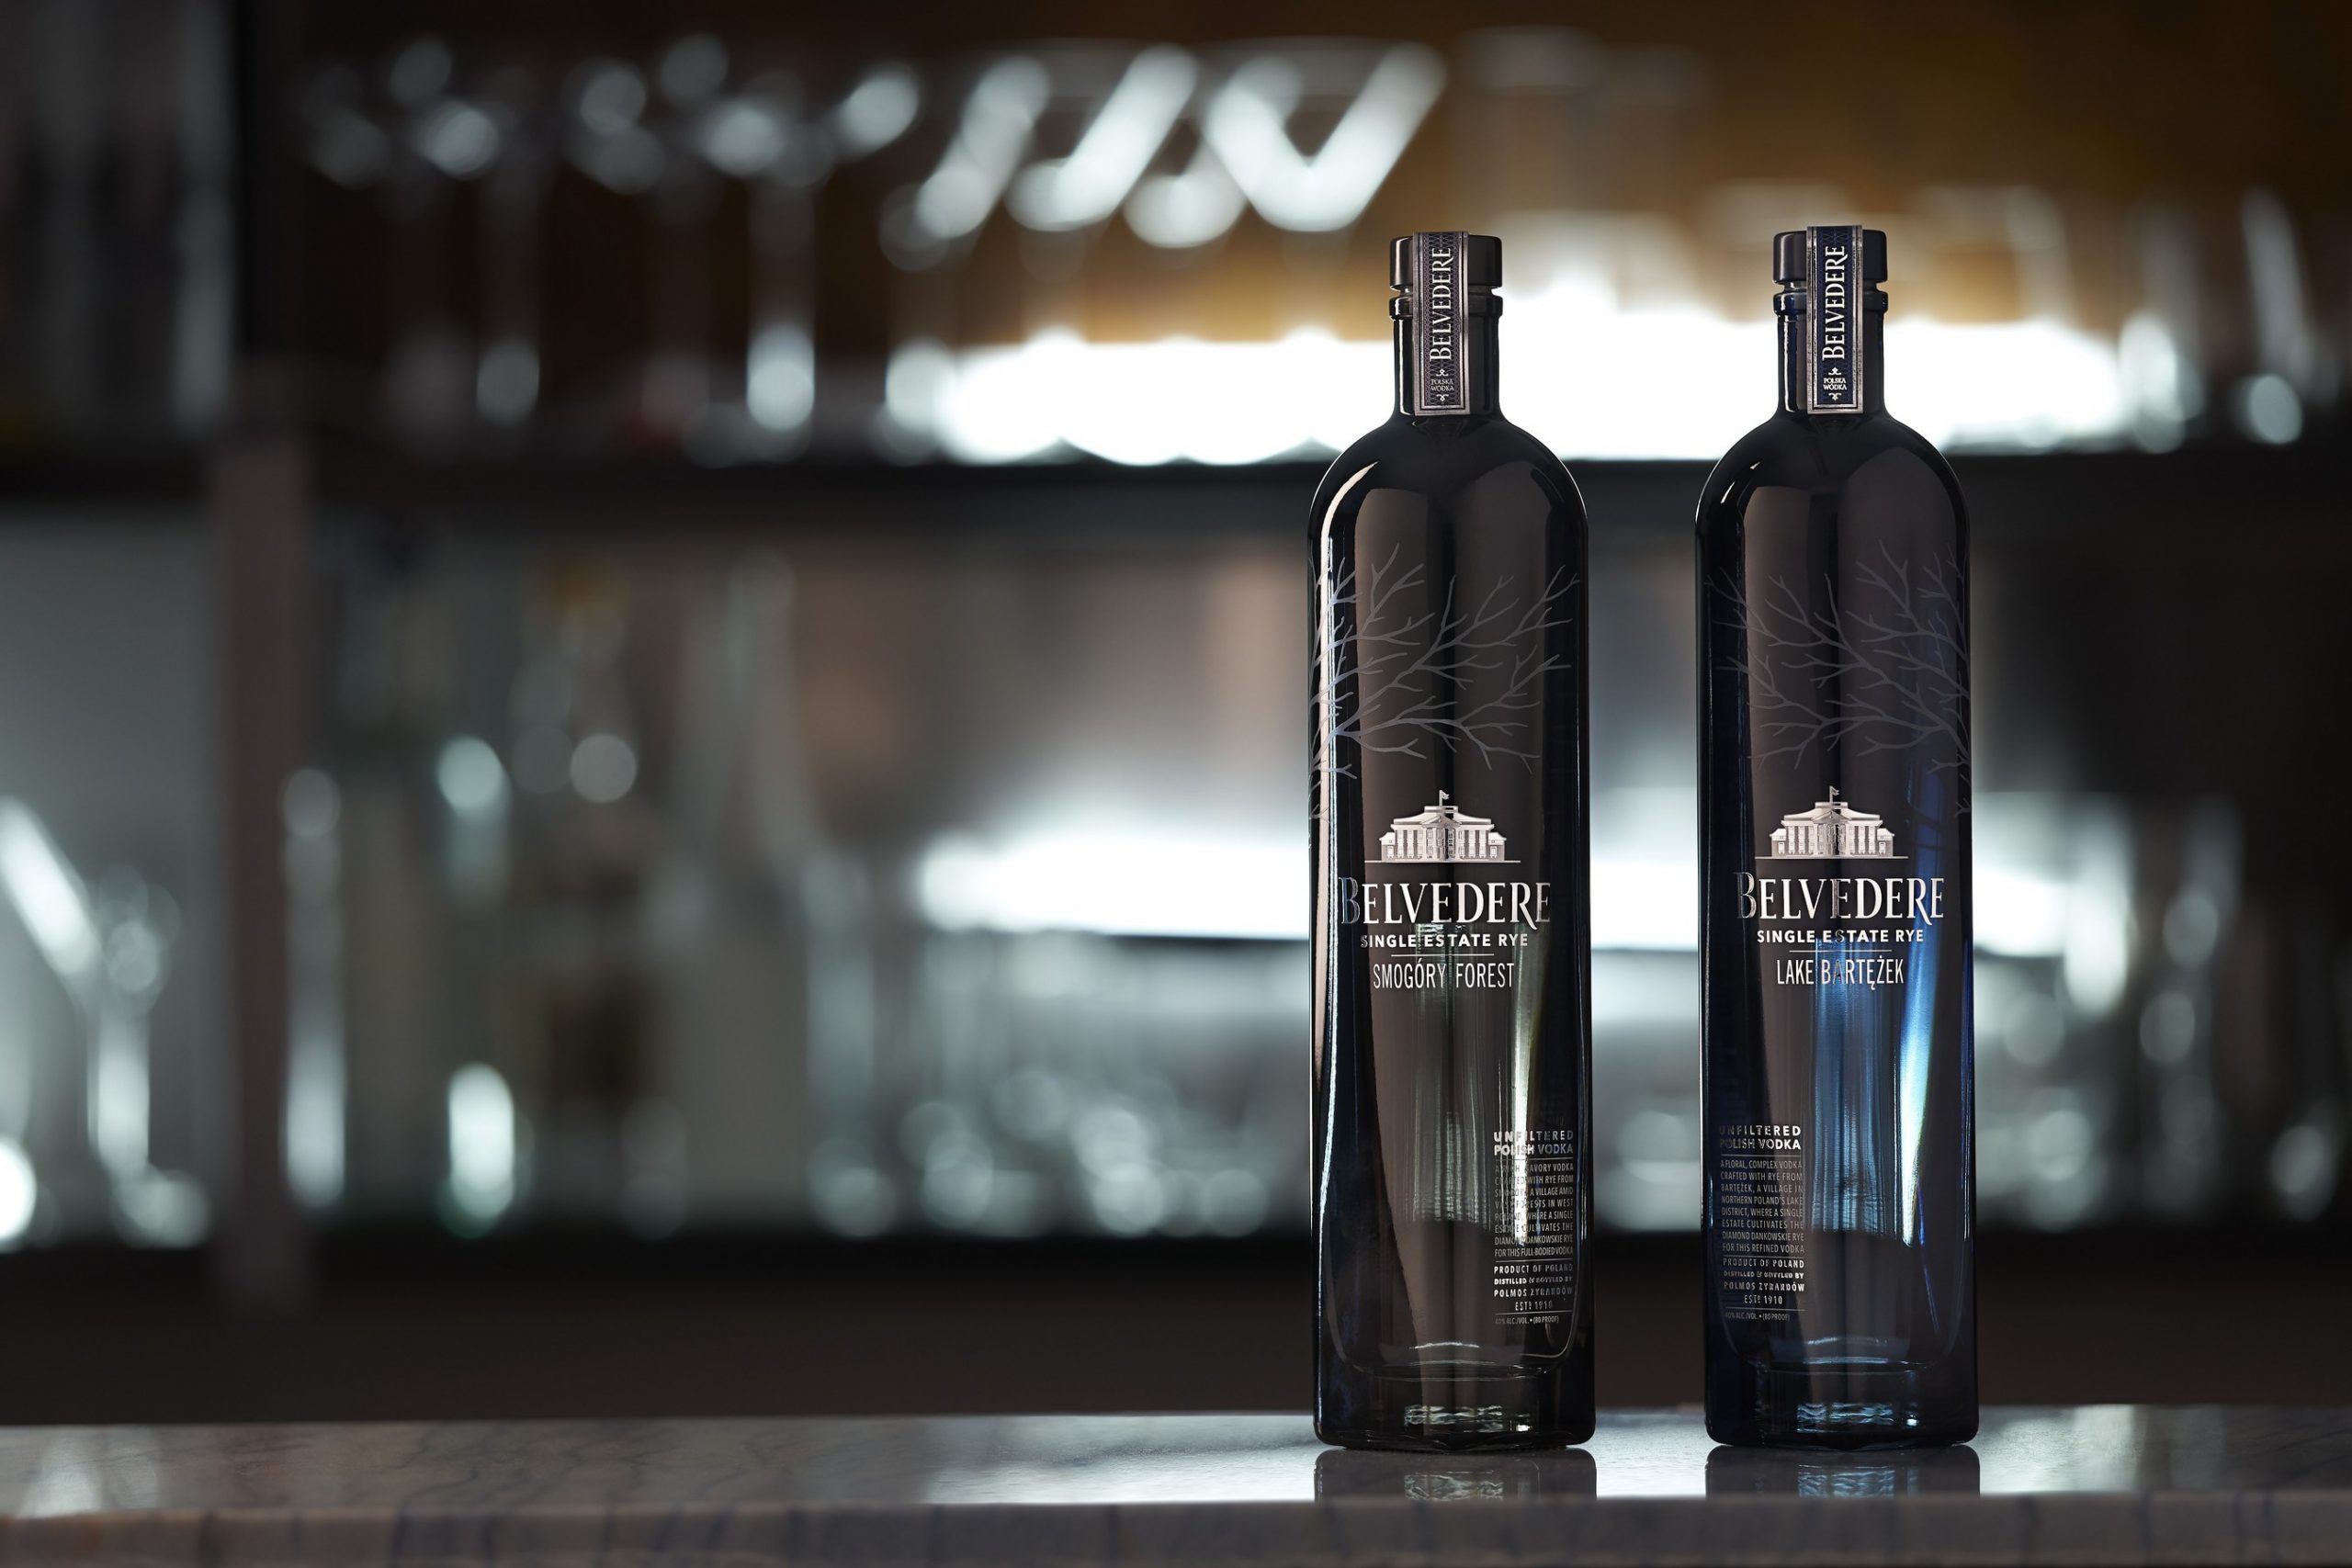 Belvedere banks on consumers' valuing spirits' origin stories and